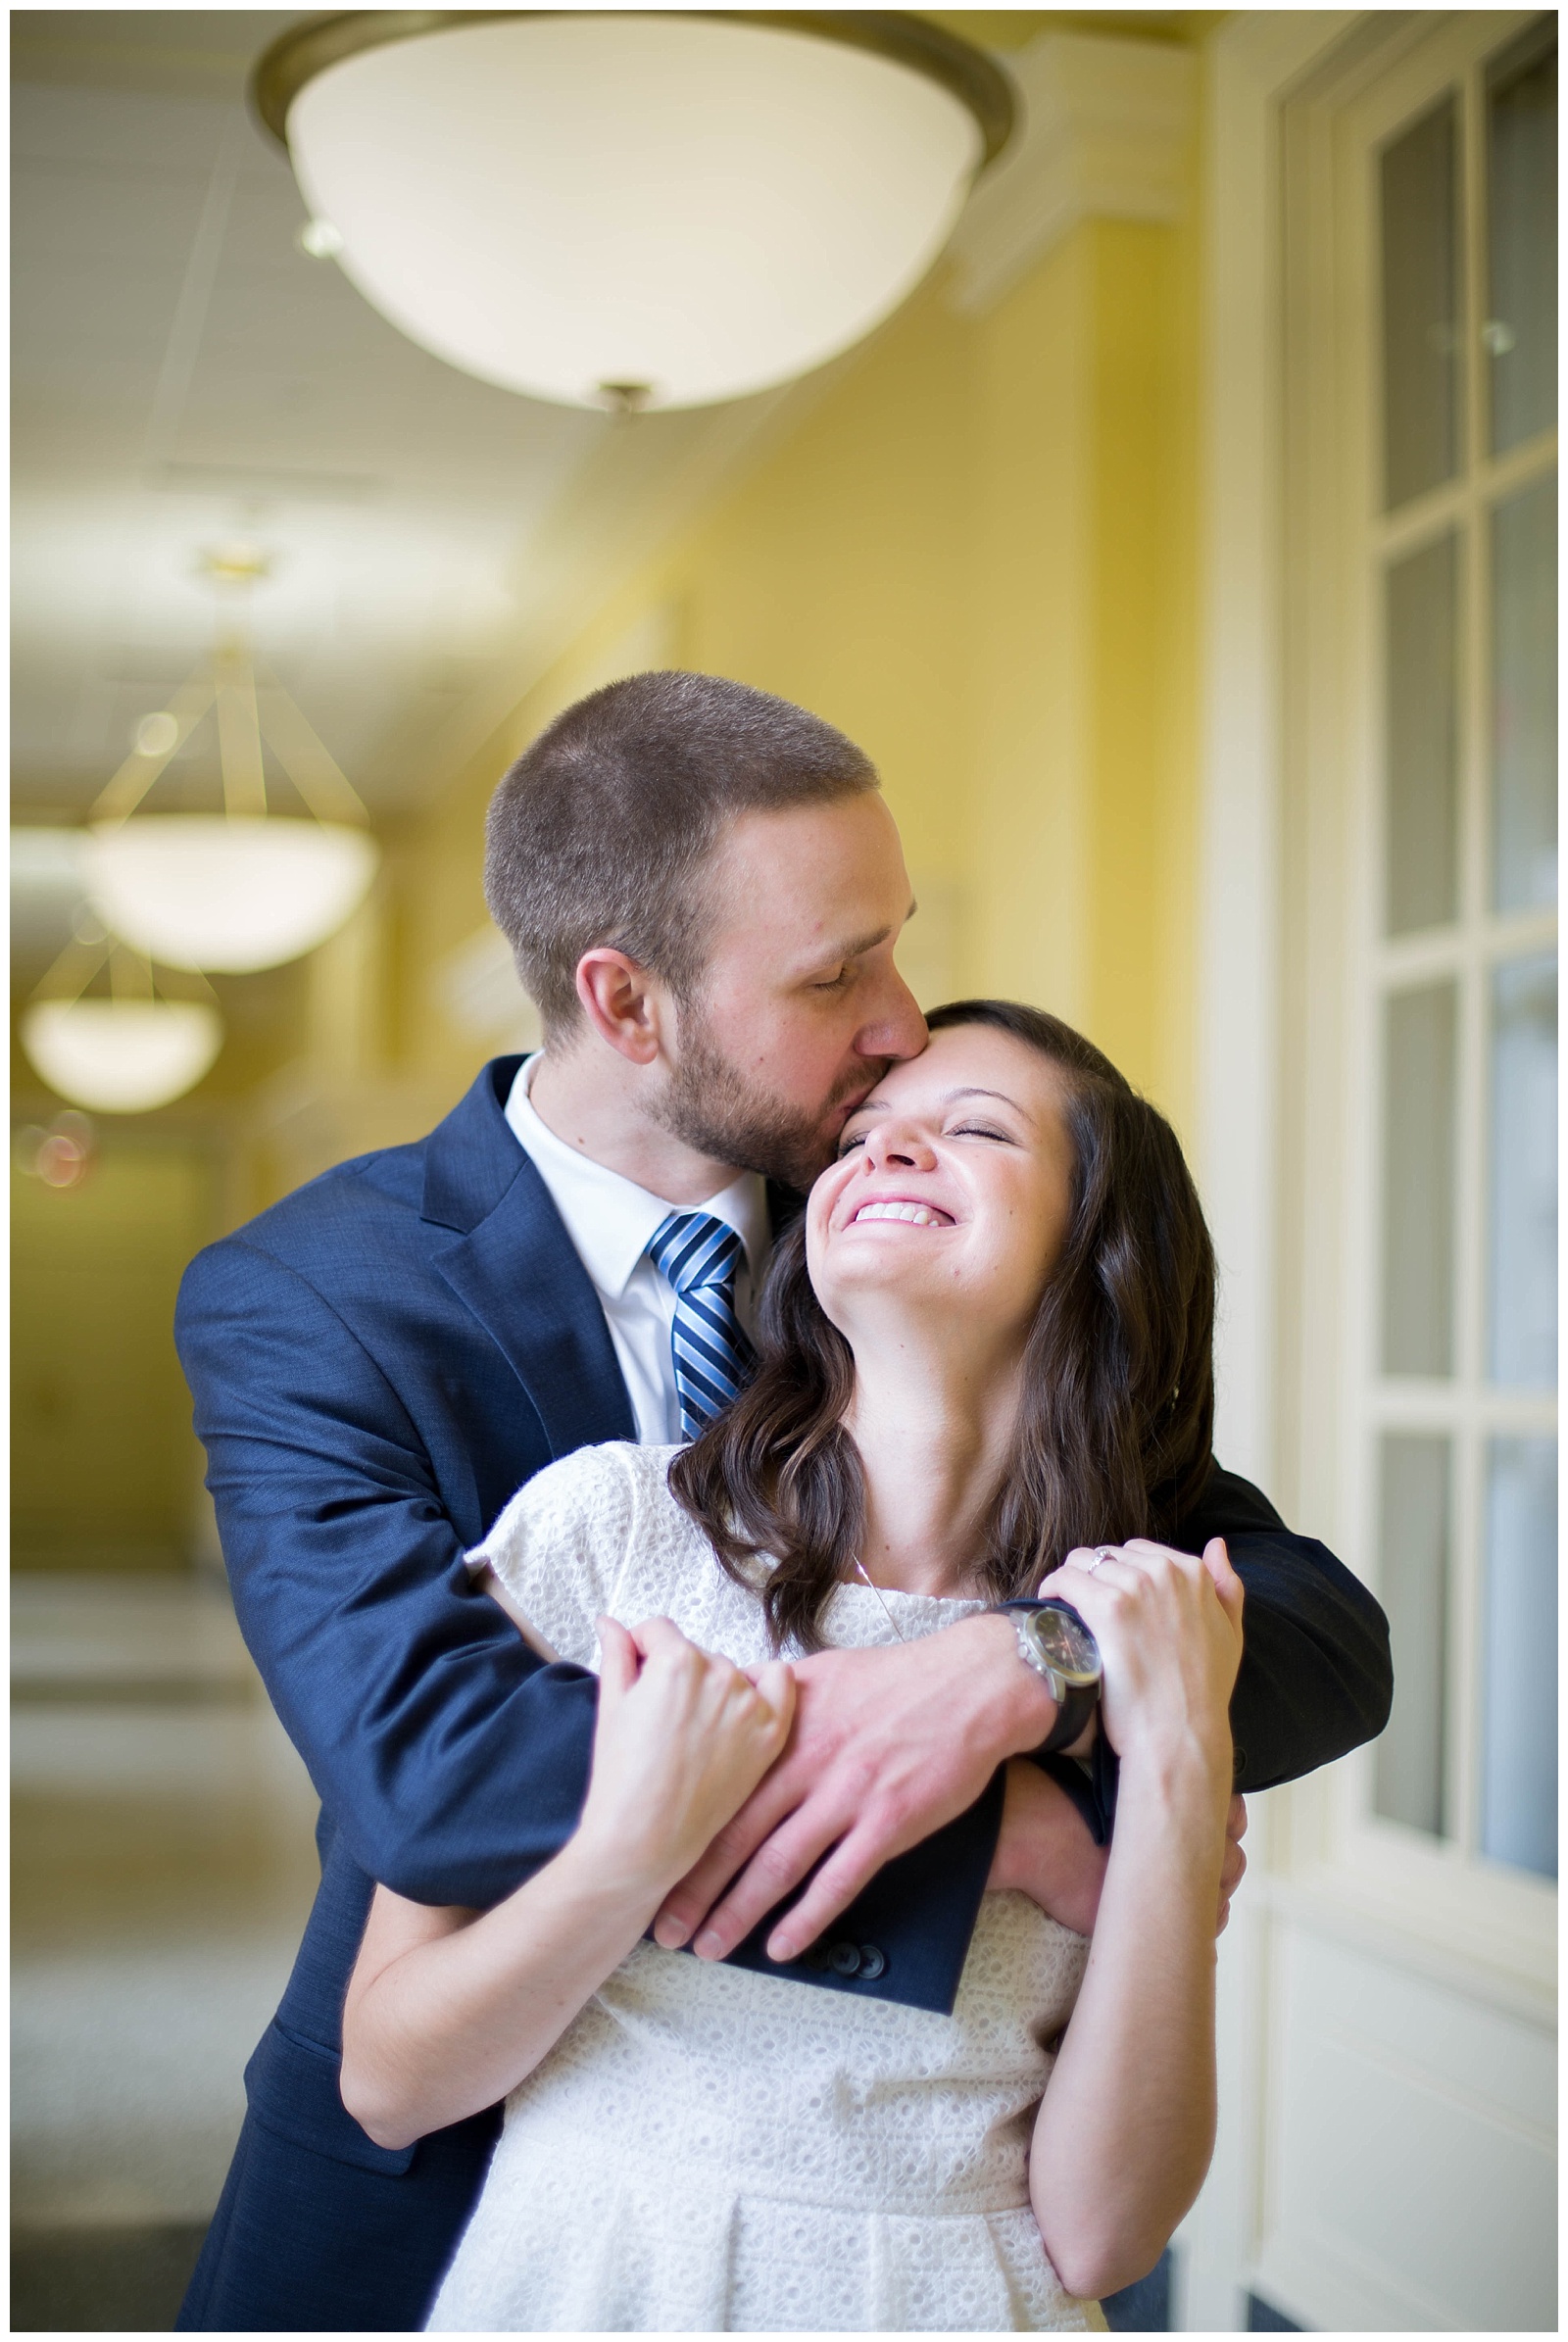 Oxford Engagement Session- Allyson and Stuart | Monica Brown Photography | monicabrownphoto.com